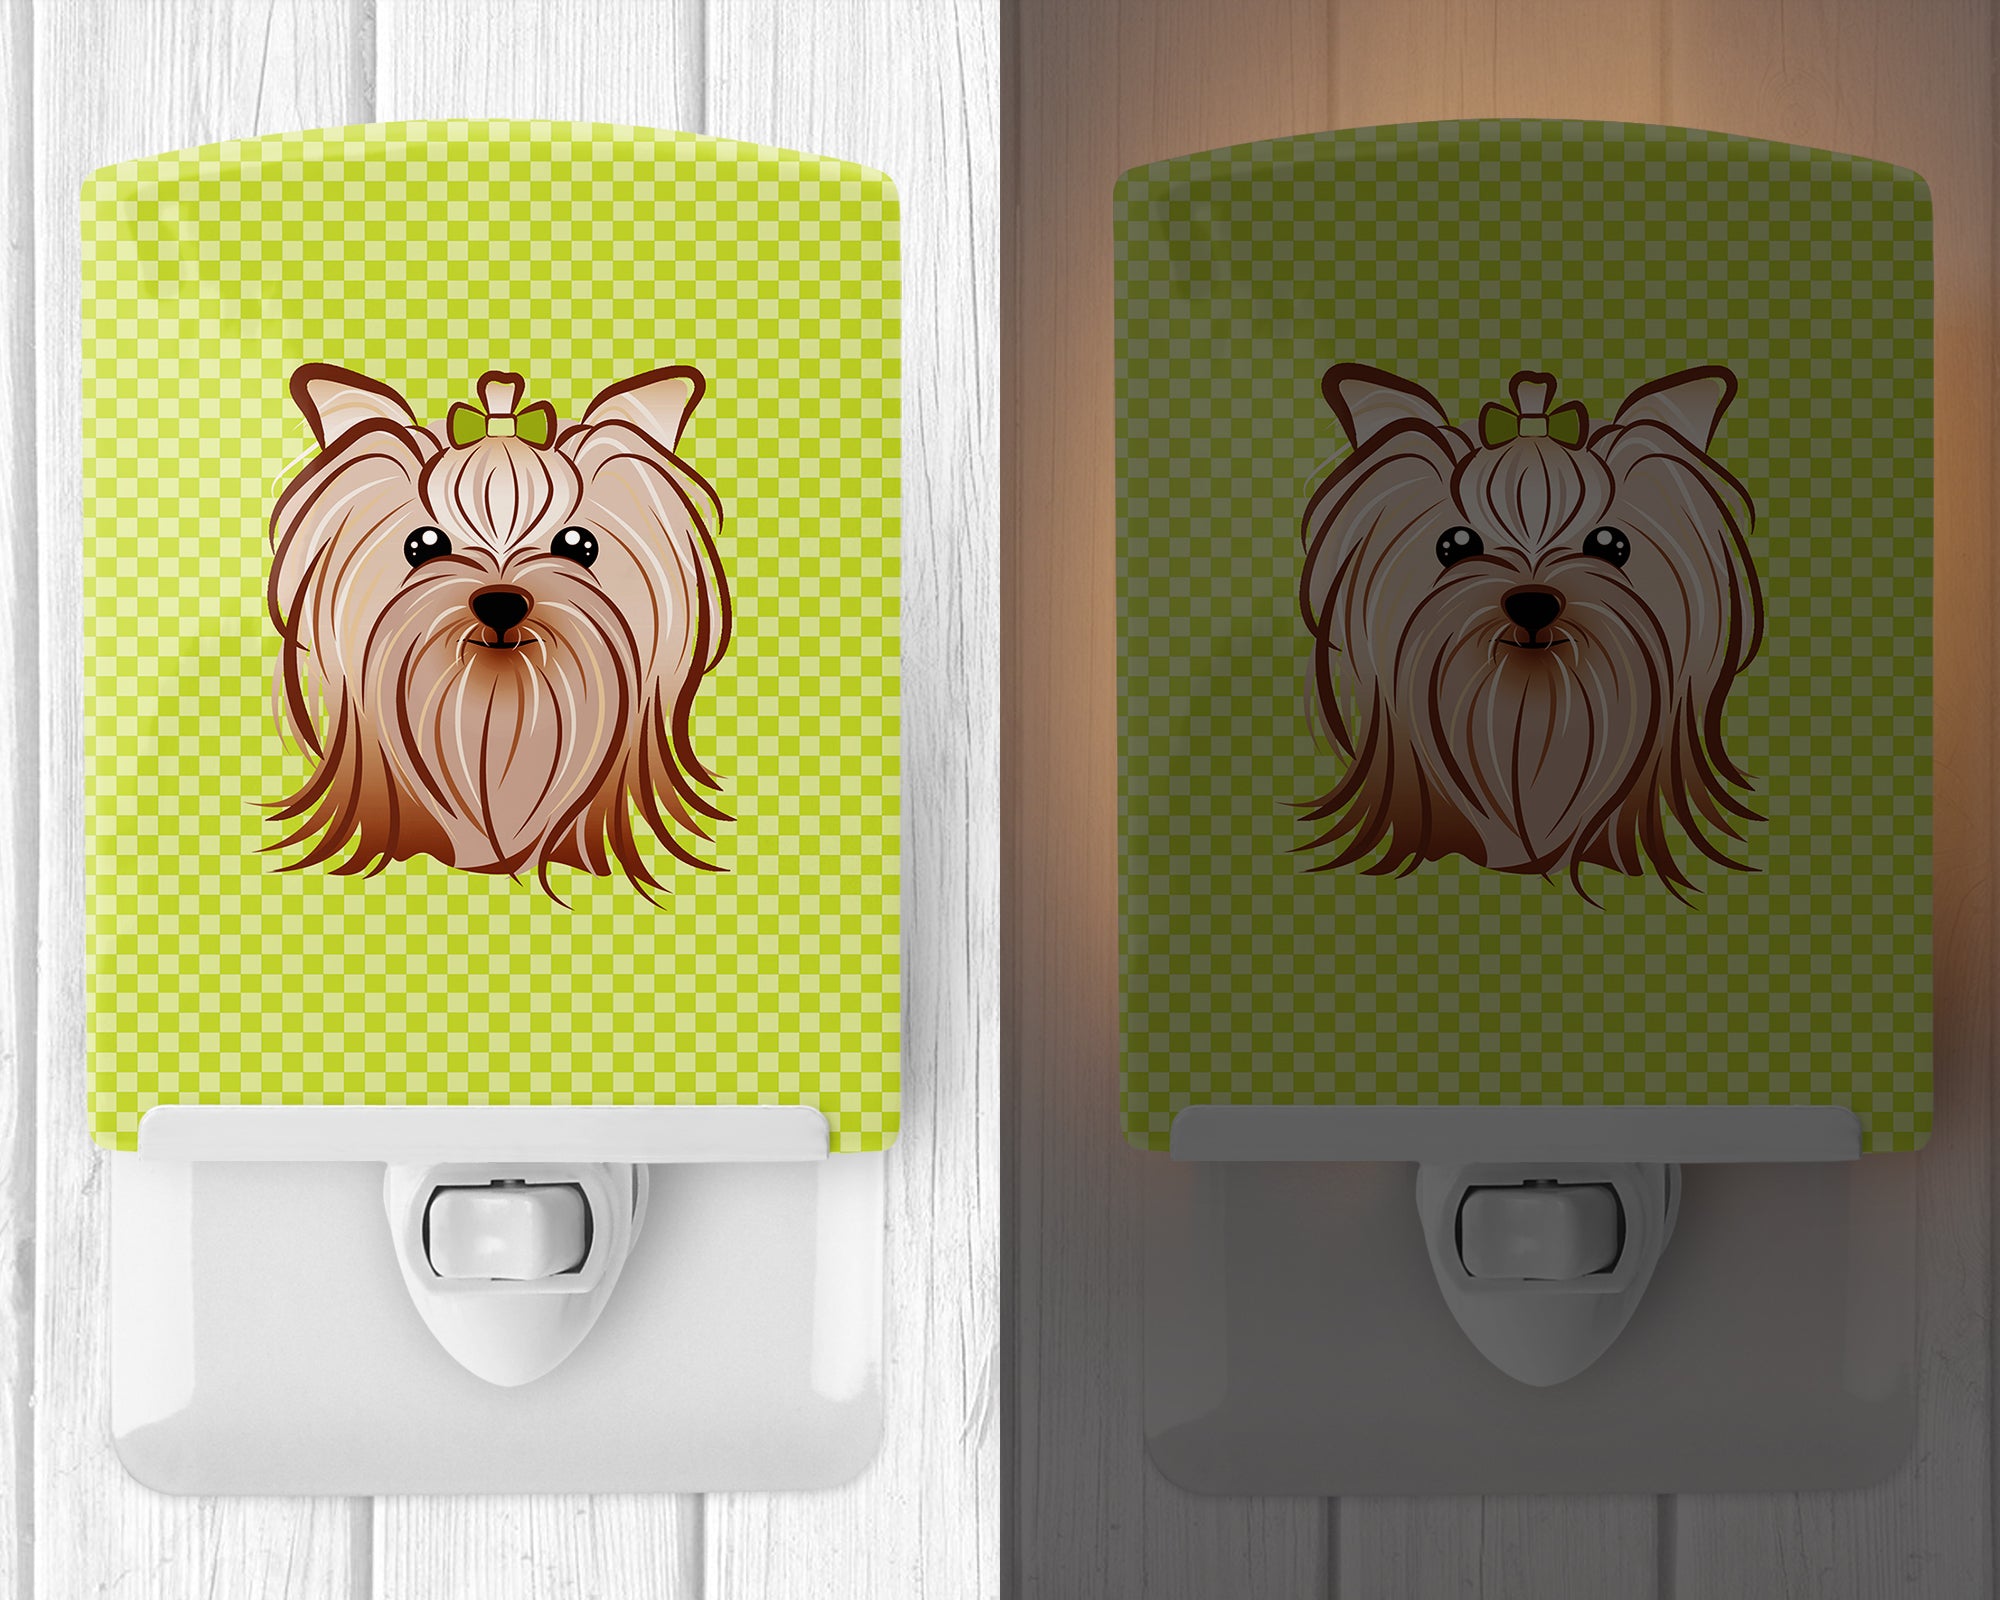 Checkerboard Lime Green Yorkie Yorkishire Terrier Ceramic Night Light BB1266CNL - the-store.com